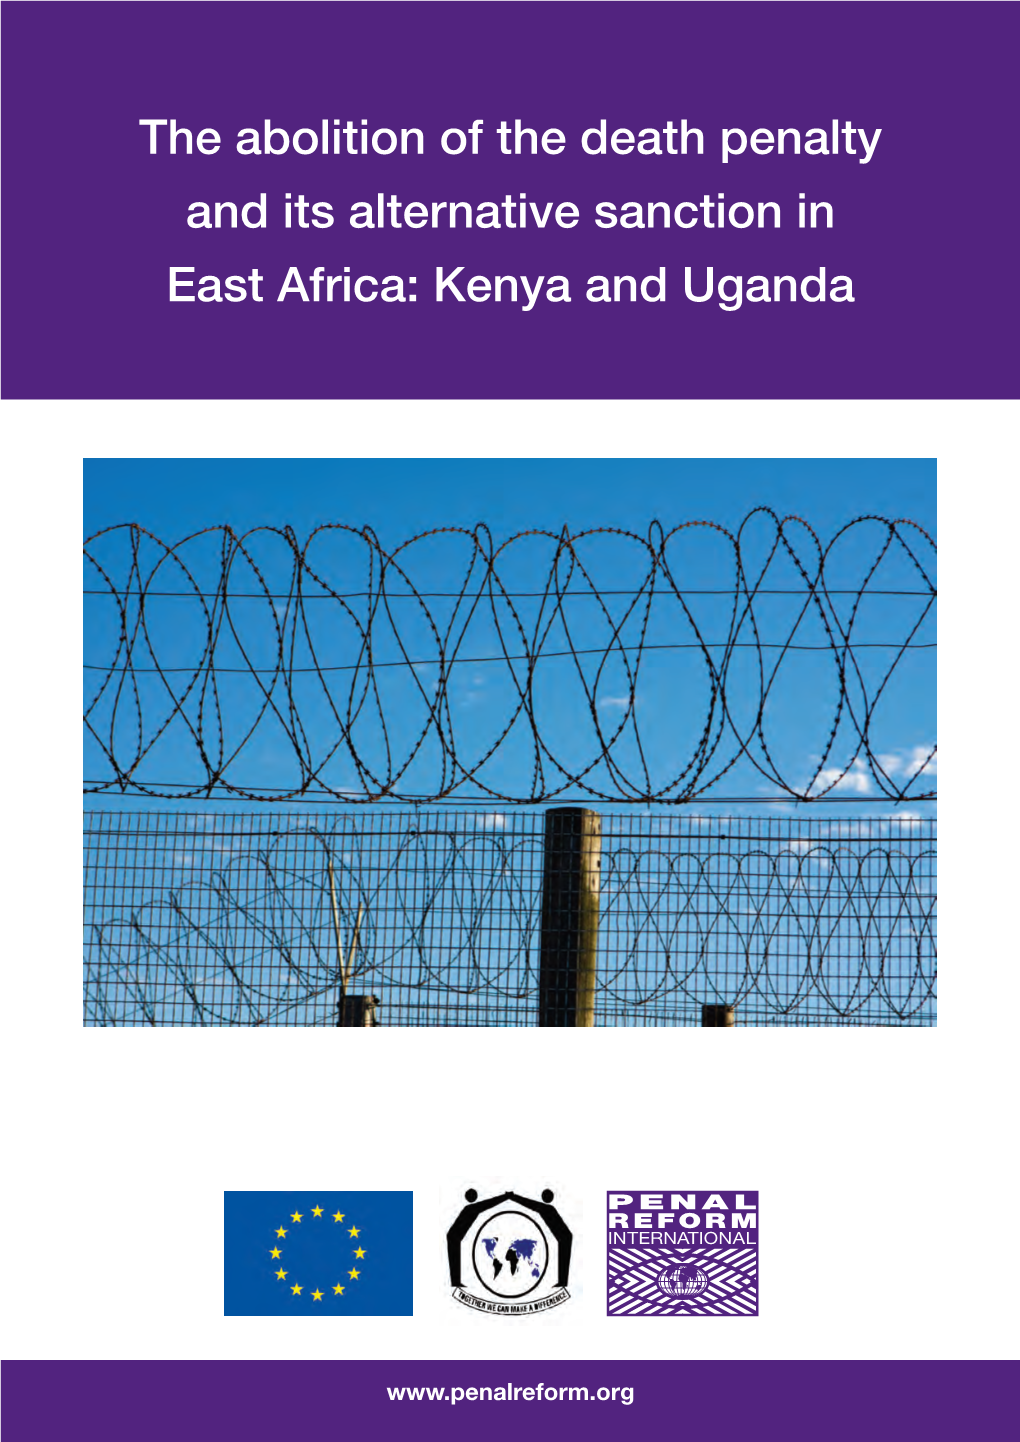 The Abolition of the Death Penalty and Its Alternative Sanction in East Africa: Kenya and Uganda